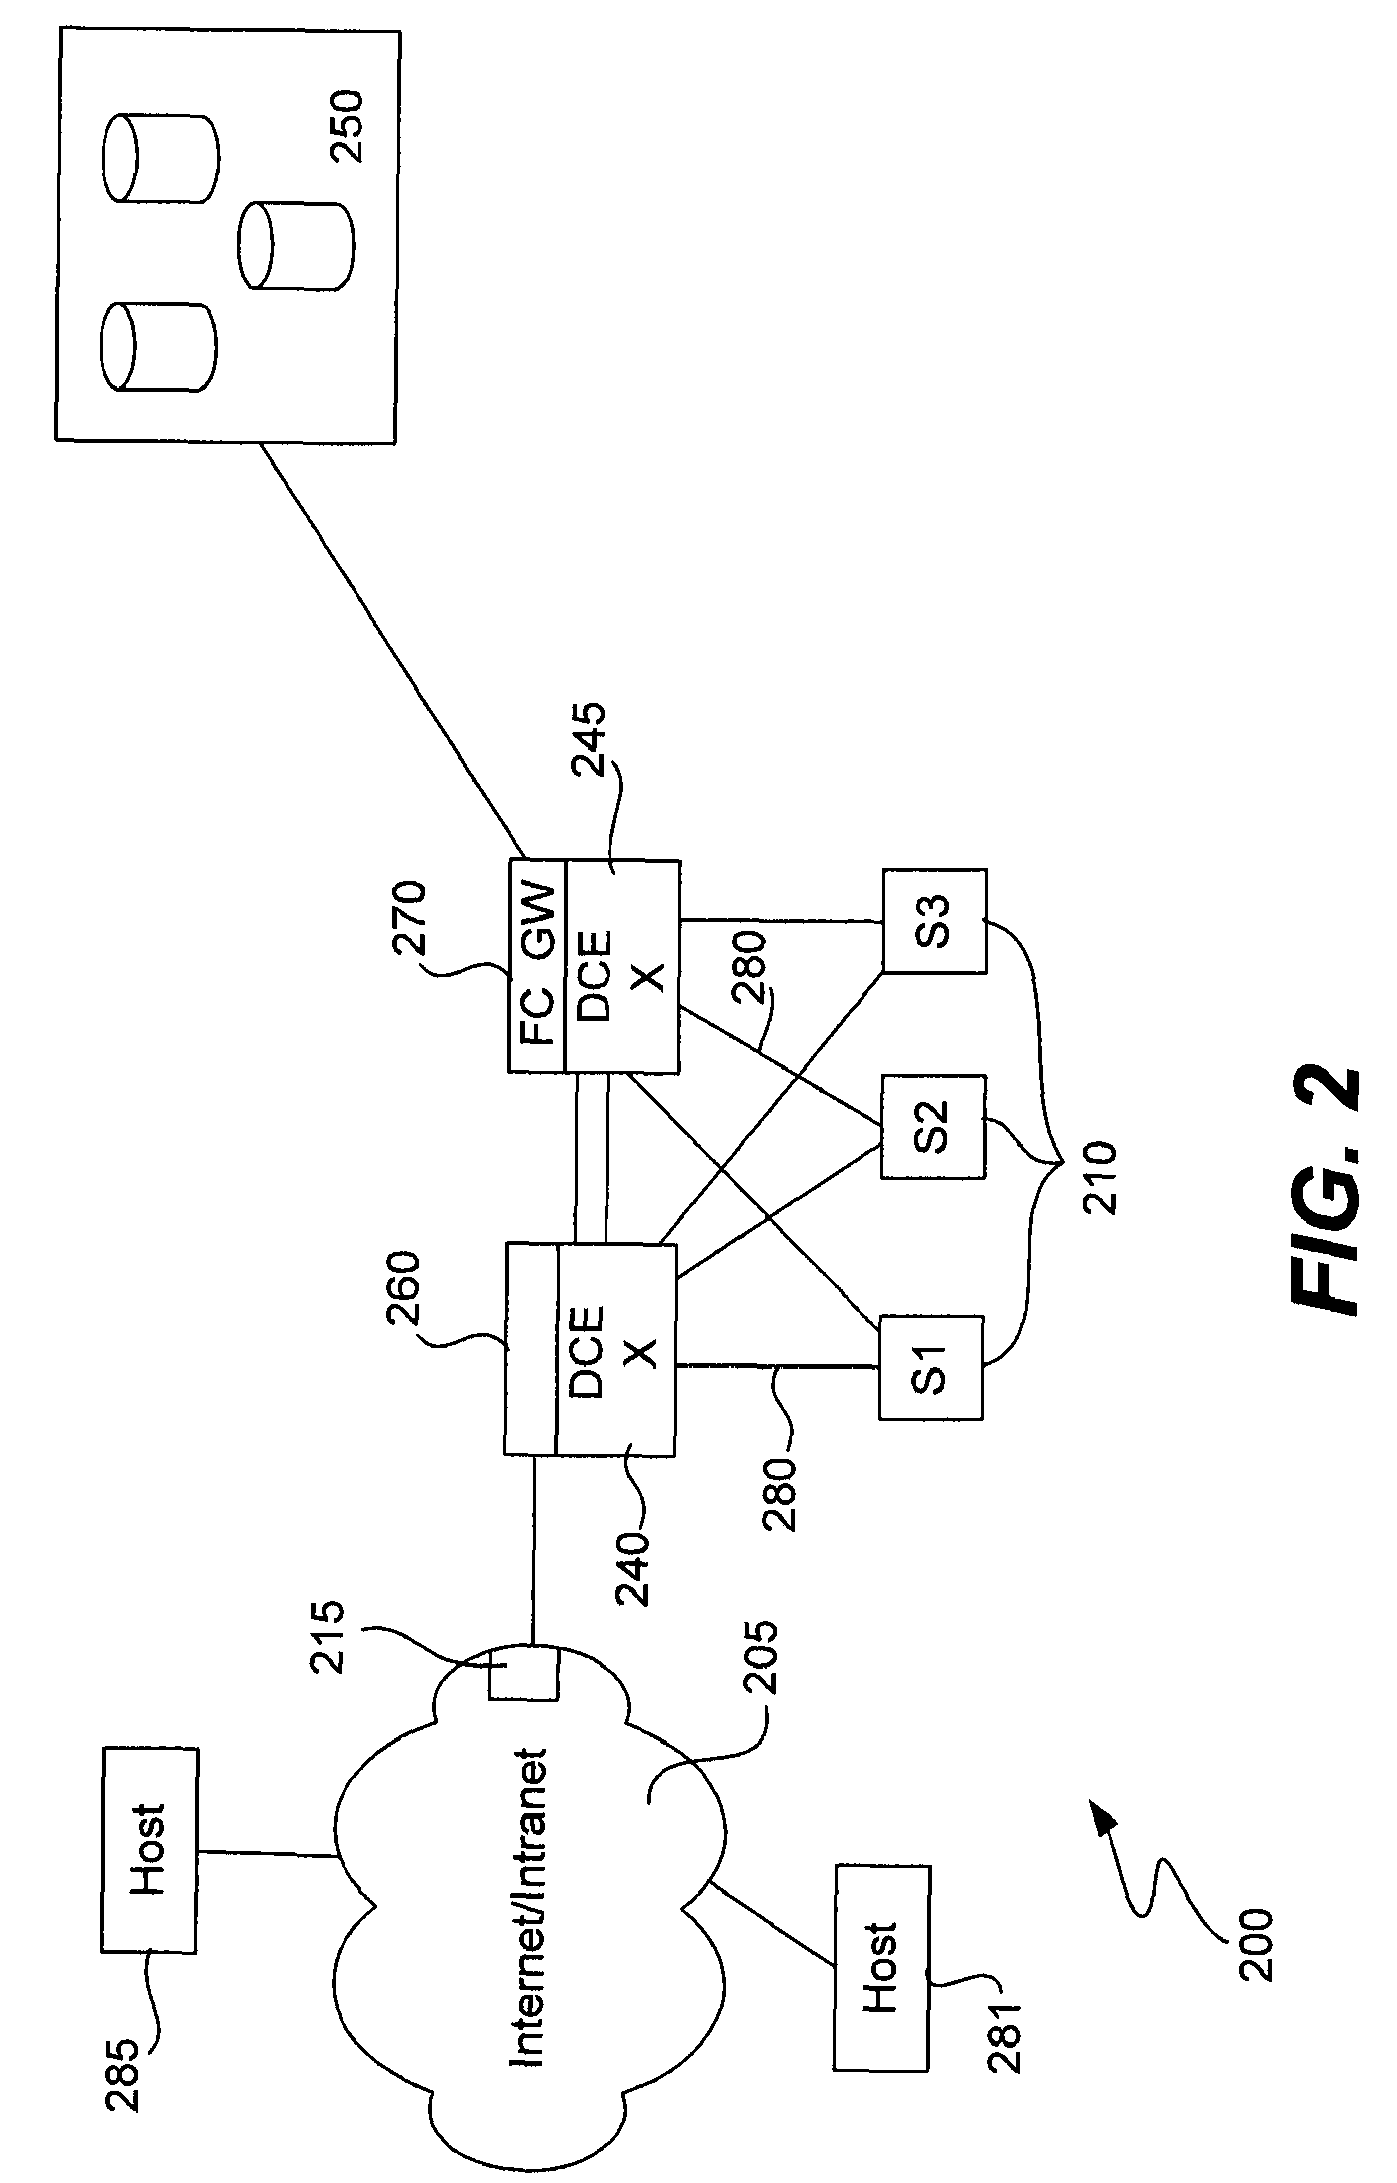 Network device architecture for consolidating input/output and reducing latency